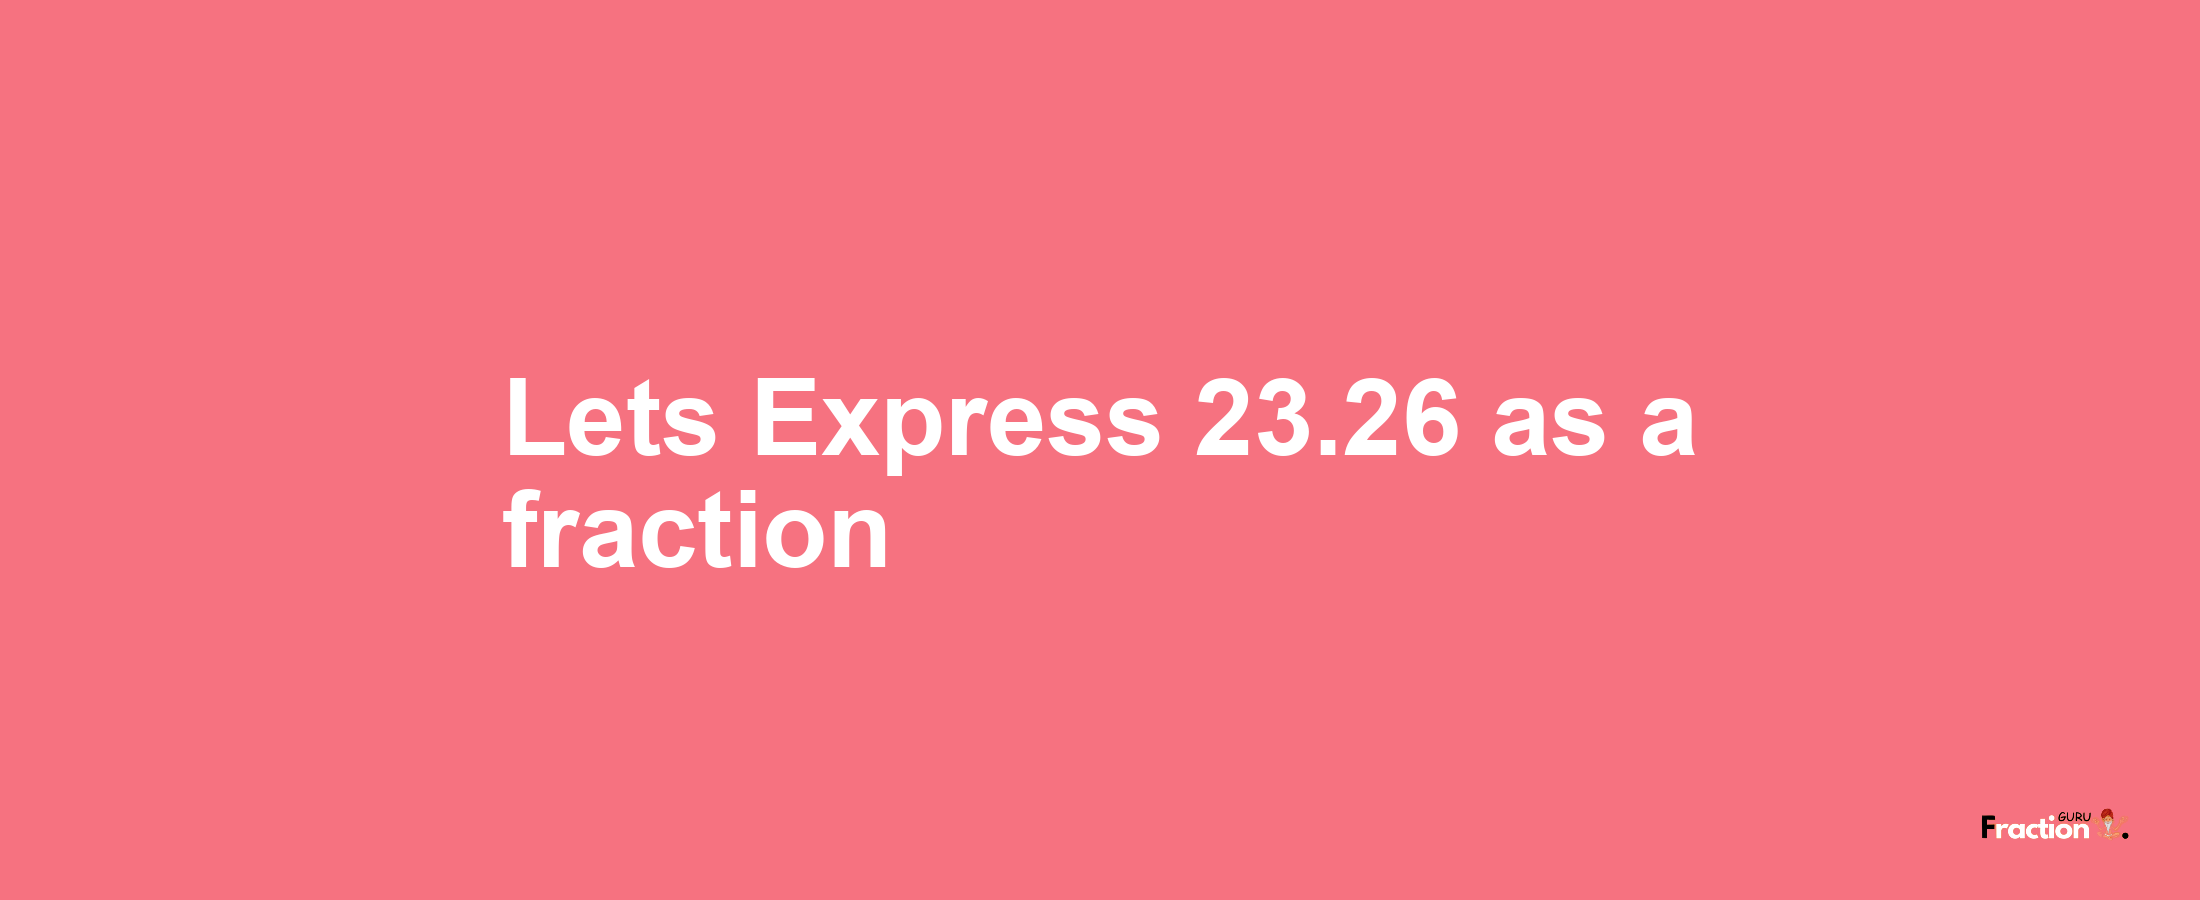 Lets Express 23.26 as afraction